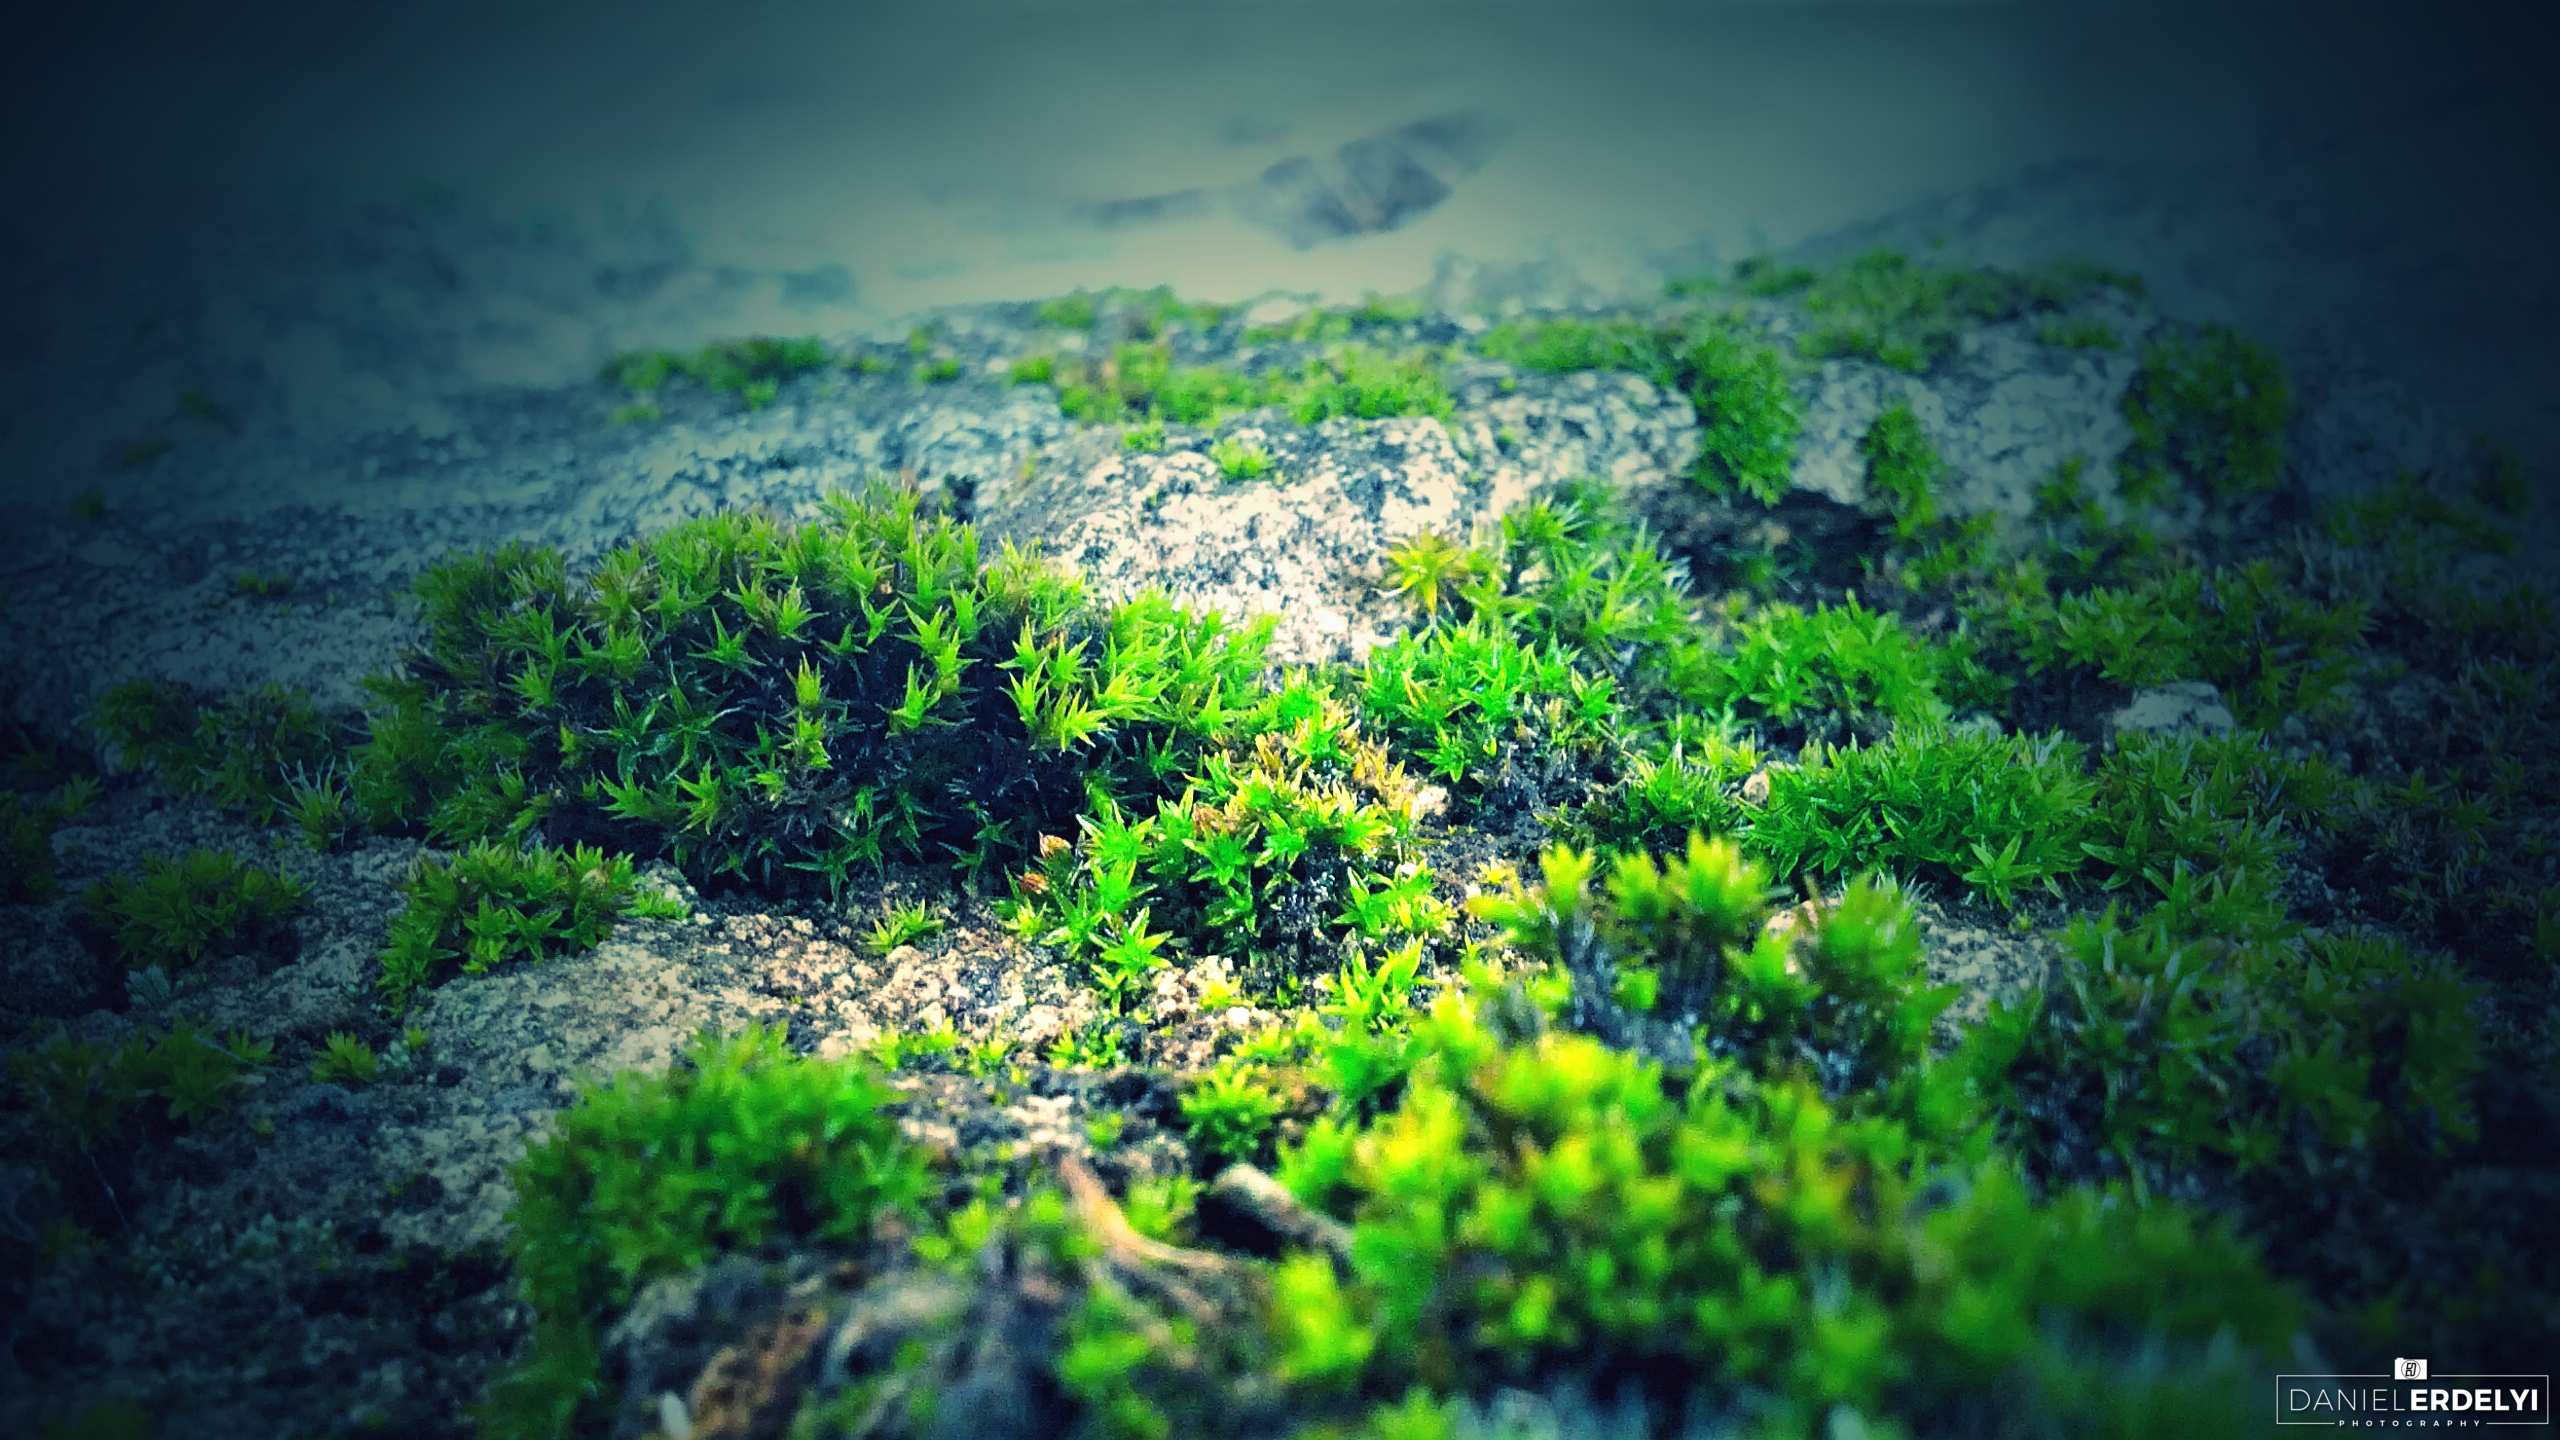 General 2560x1440 nature moss photography green blue rocks plants closeup watermarked